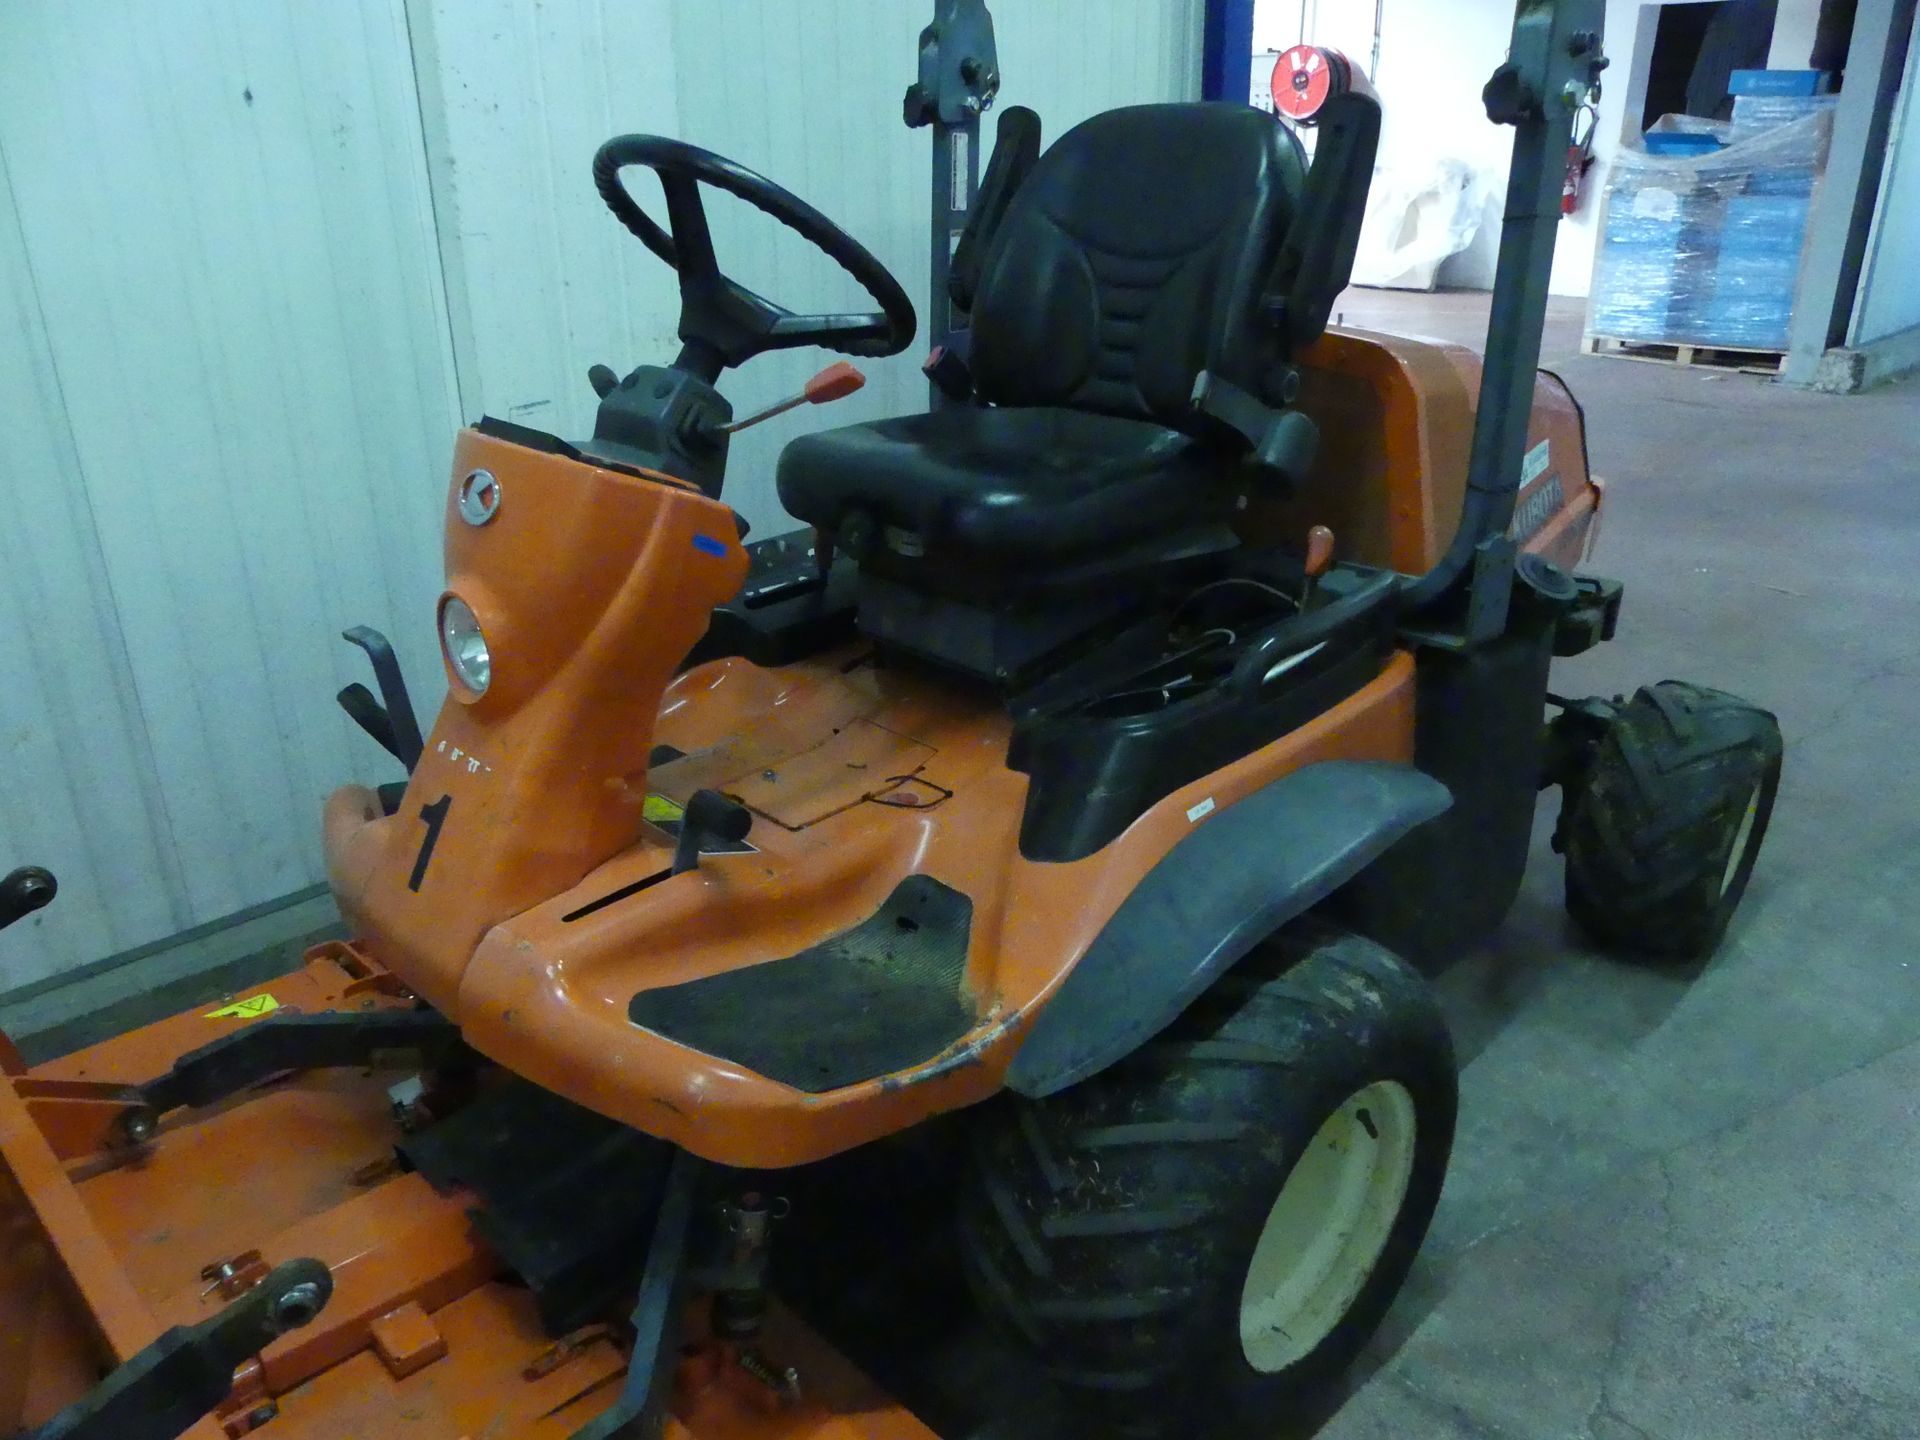 Null KUBOTA RIDE-ON MOWER F 3680

01/2011

647 HOURS WITH MOWING DECK